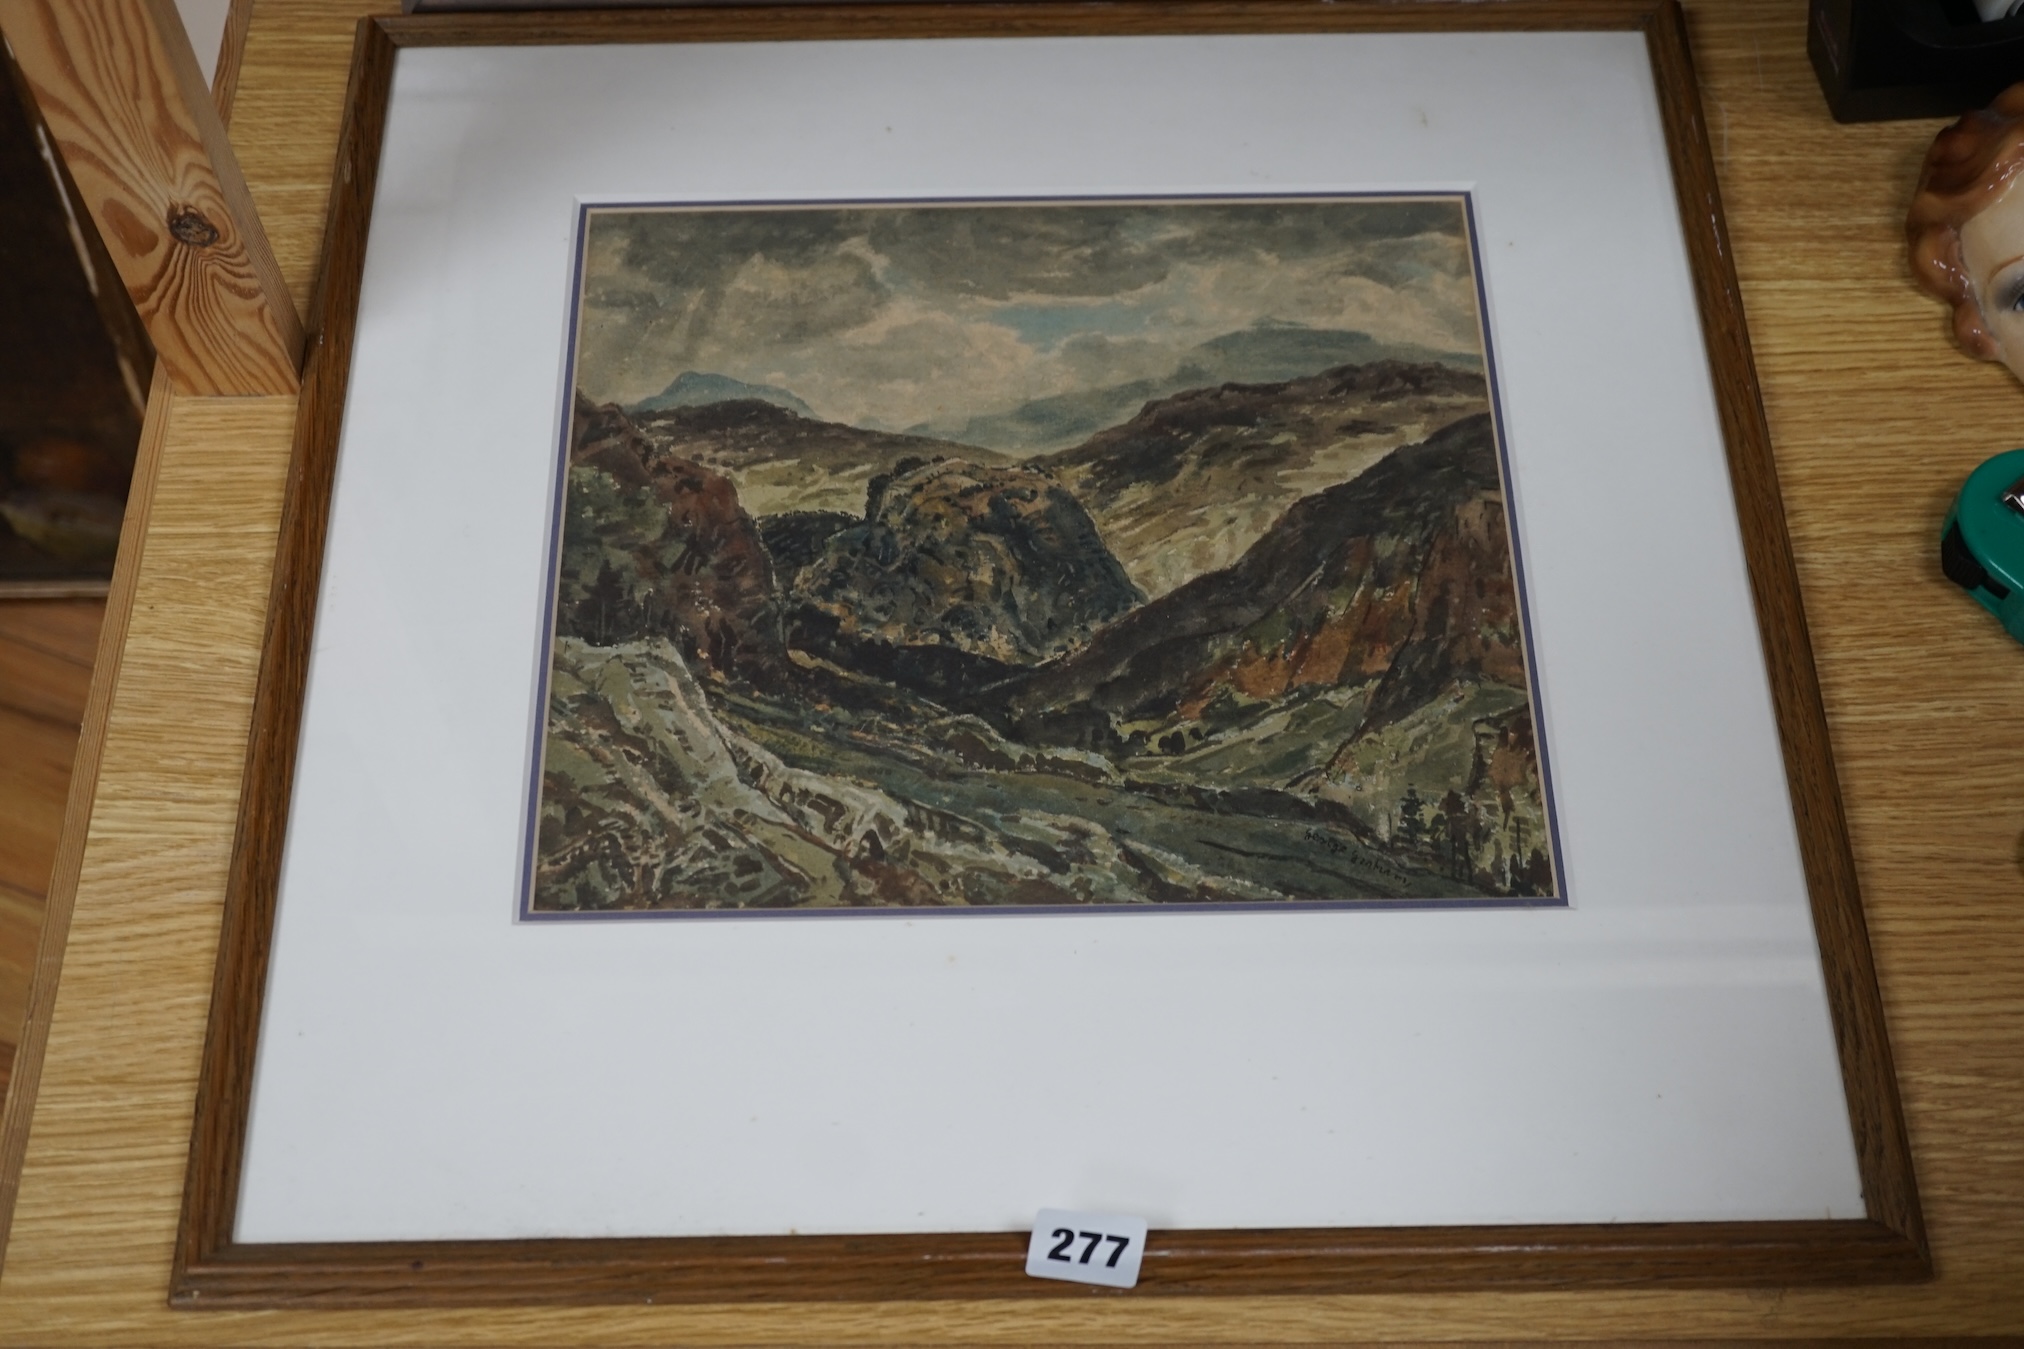 From the Studio of Fred Cuming. George Graham (1881-1949), watercolour, Mountainous landscape, signed, details verso, 27 x 31cm. Condition - fair to good